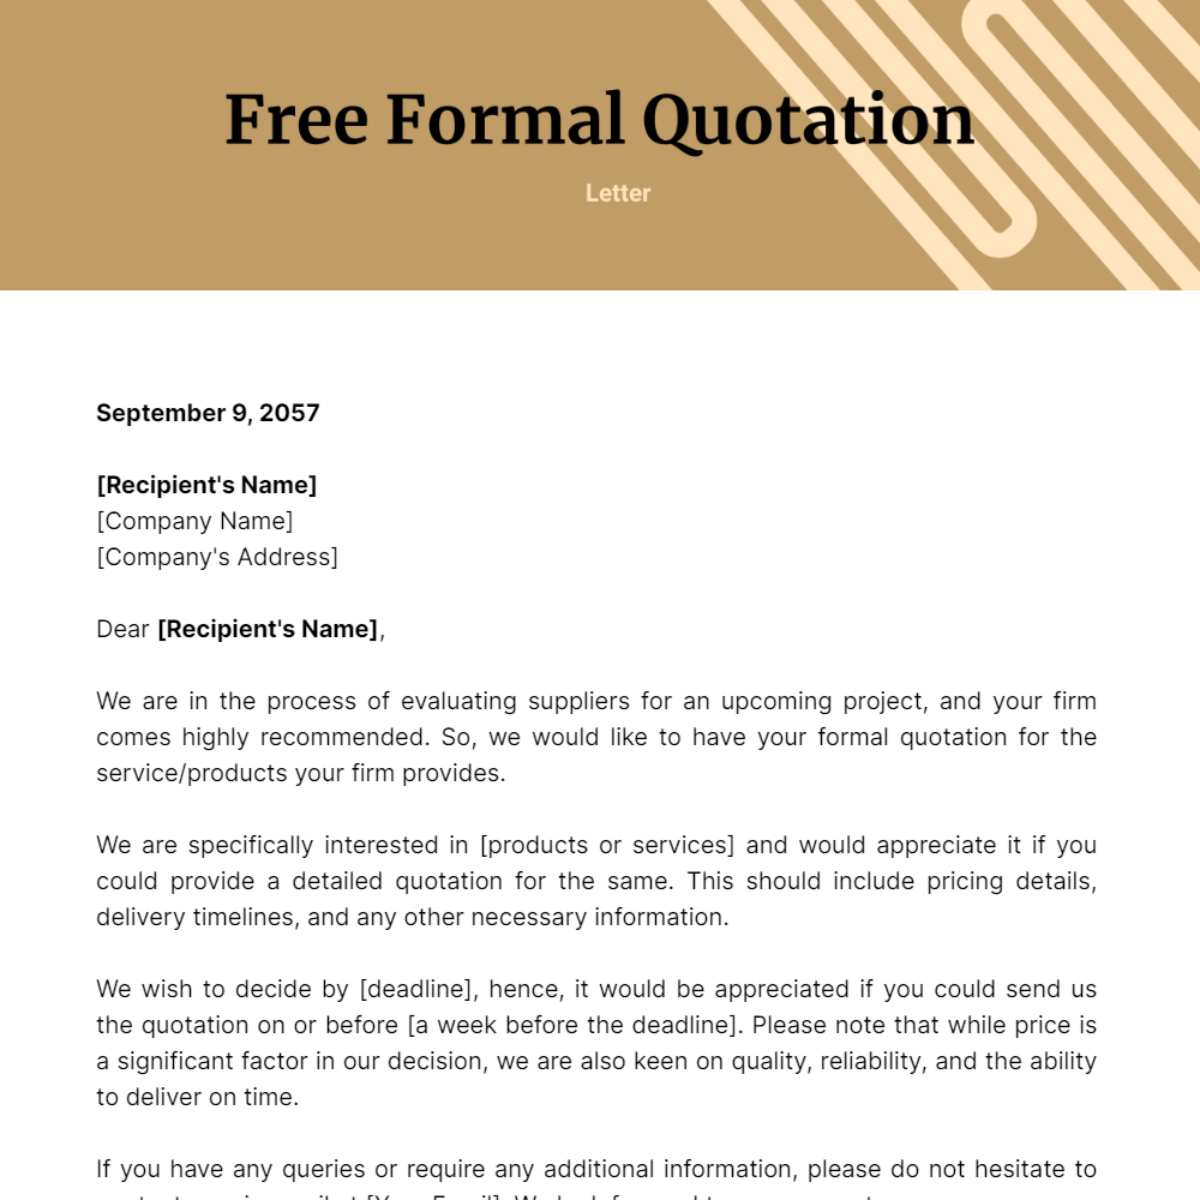 Formal Quotation Letter Template